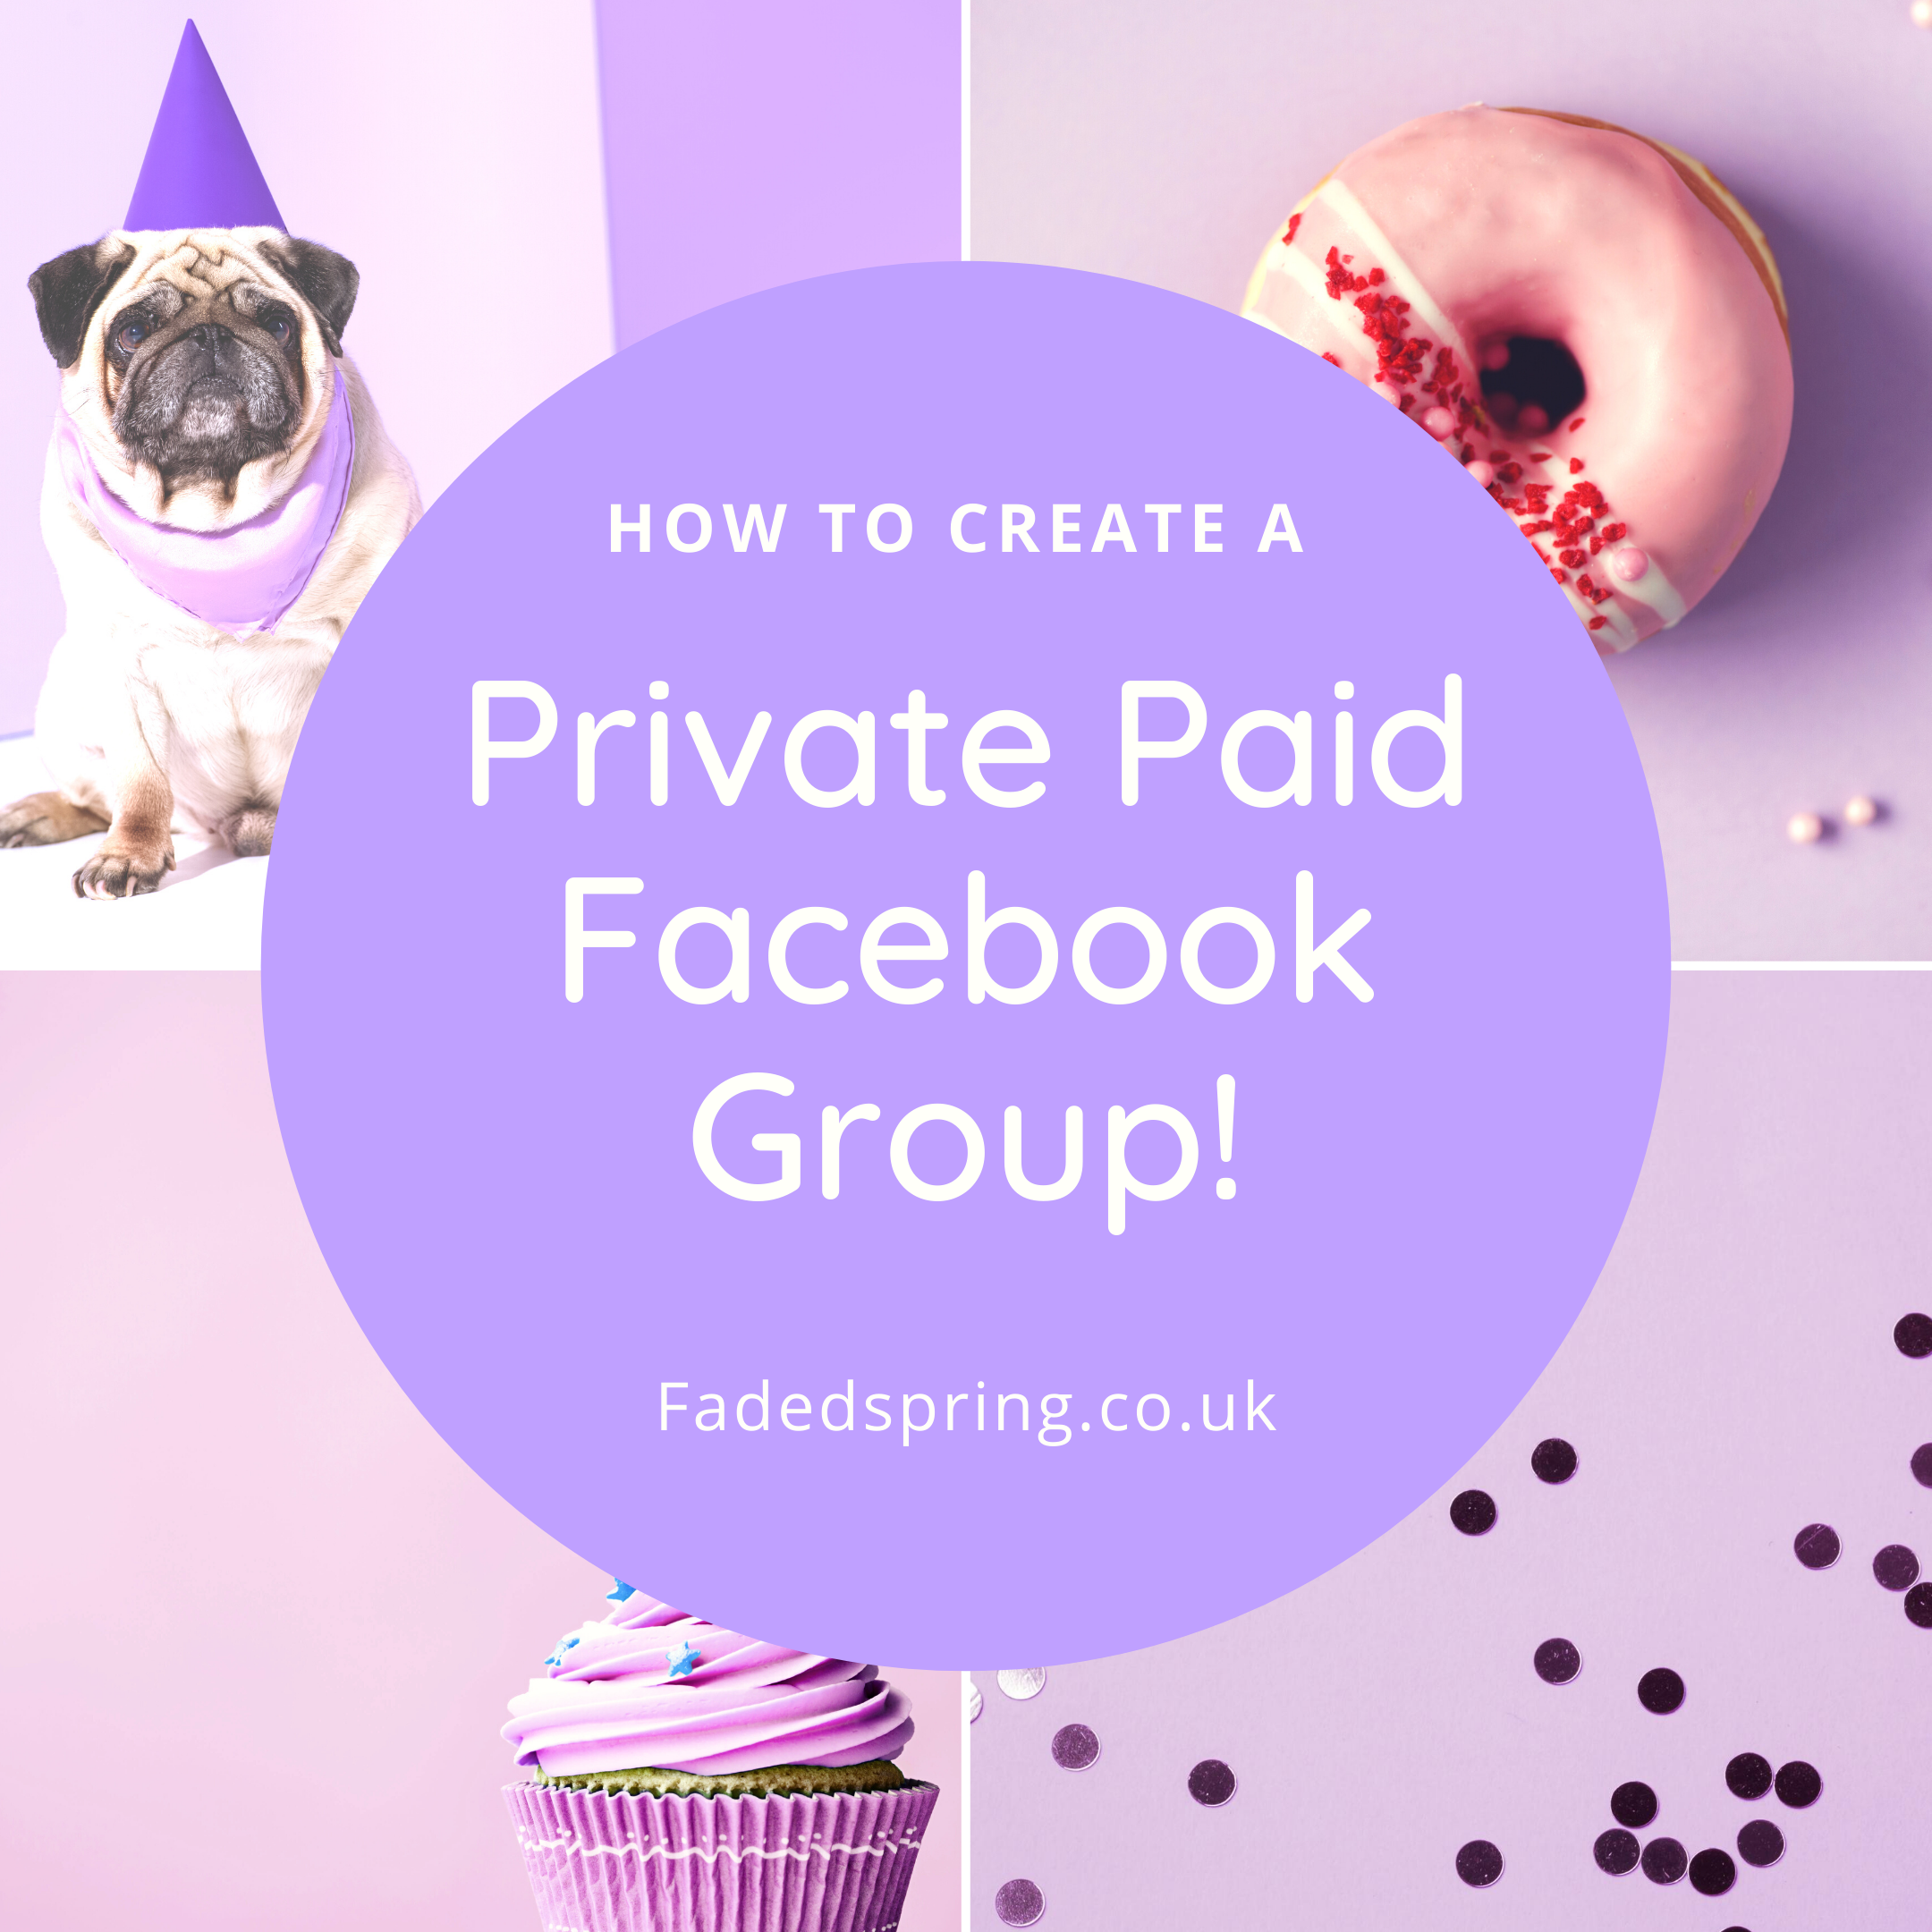 <img src="ana.jpg" alt="ana how to create a private facebook group legit ways to make money from home"/> 